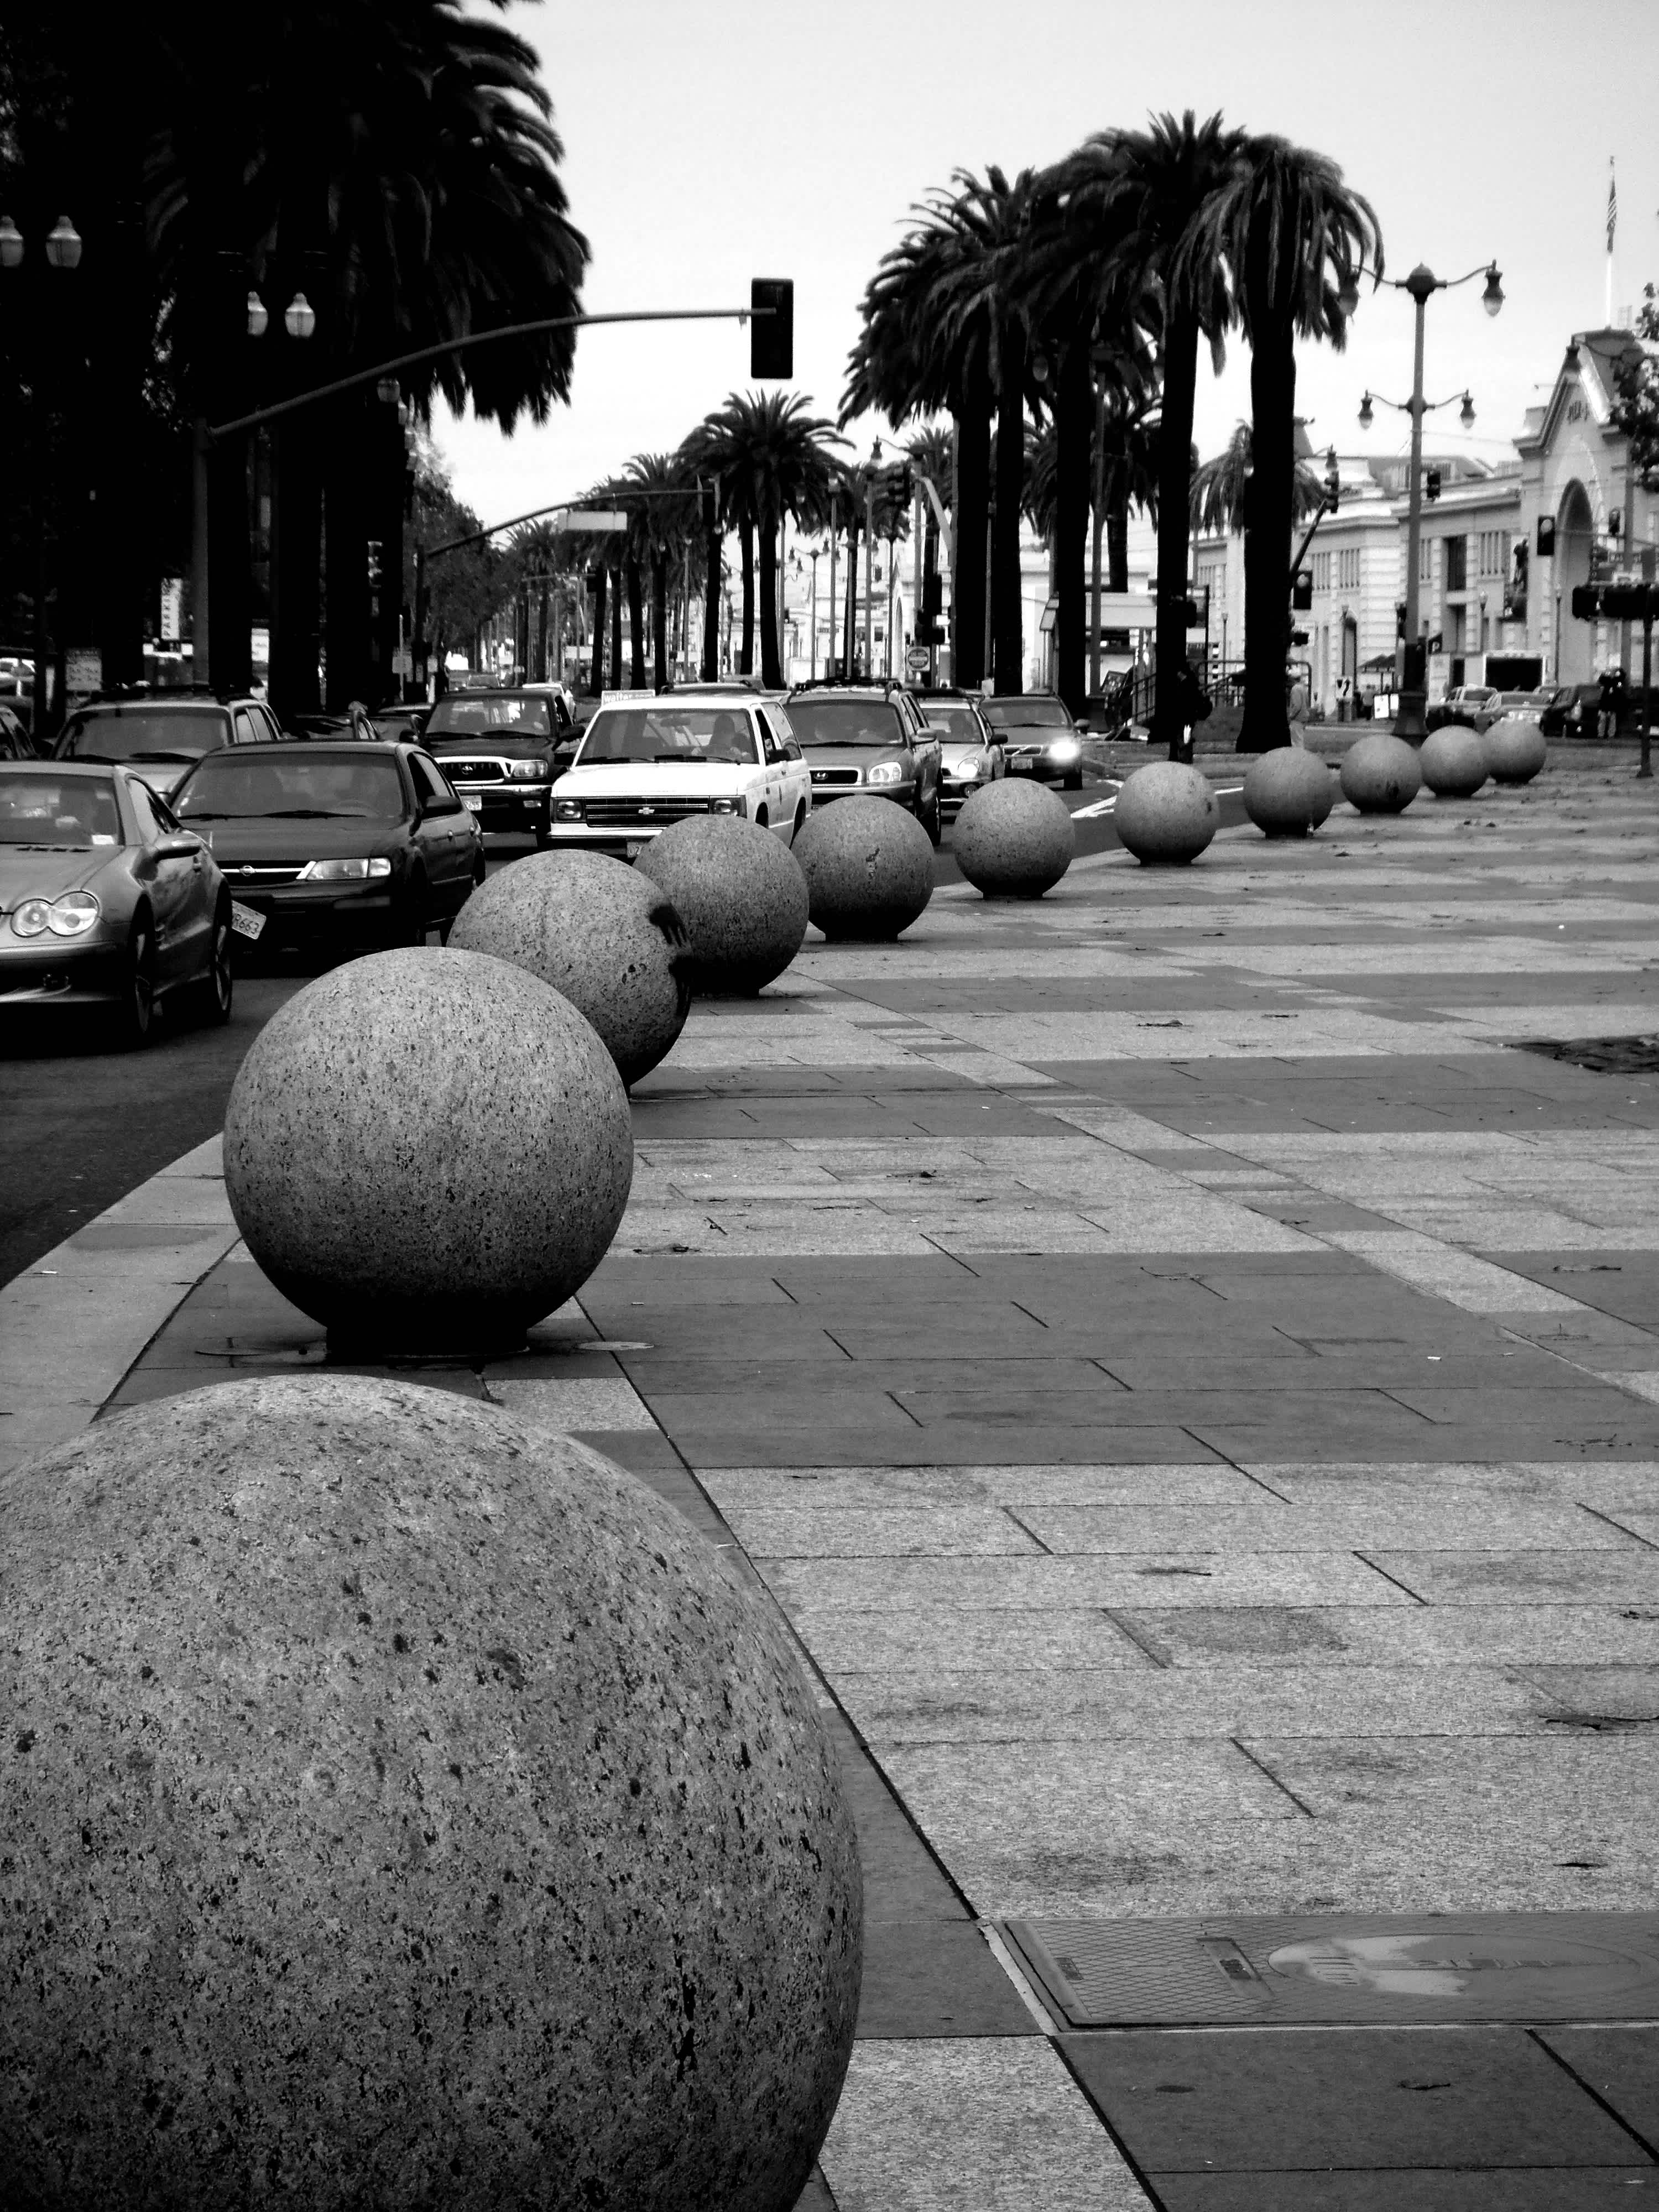 Marble orbs decorating the sidewalk with a cityscape background in black and white in Embarcadero, San Francisco, California.